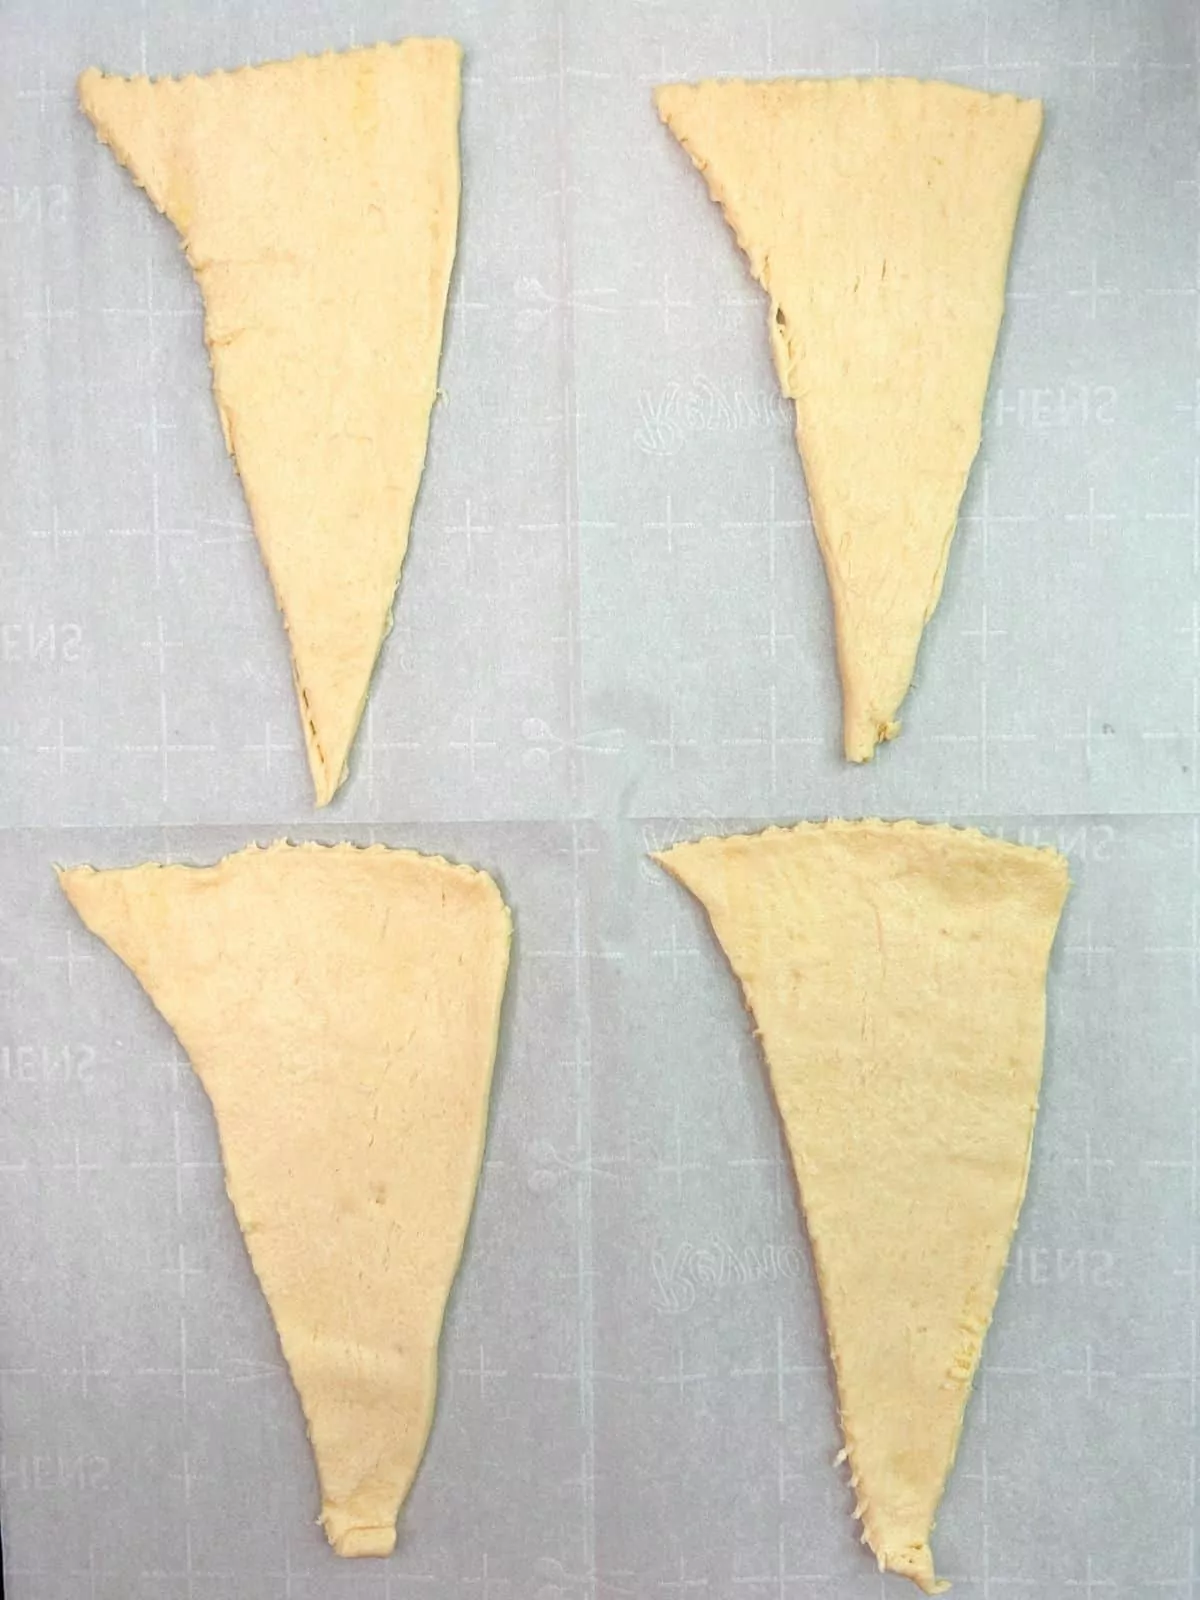 4 triangle crescent rolls on parchment paper.